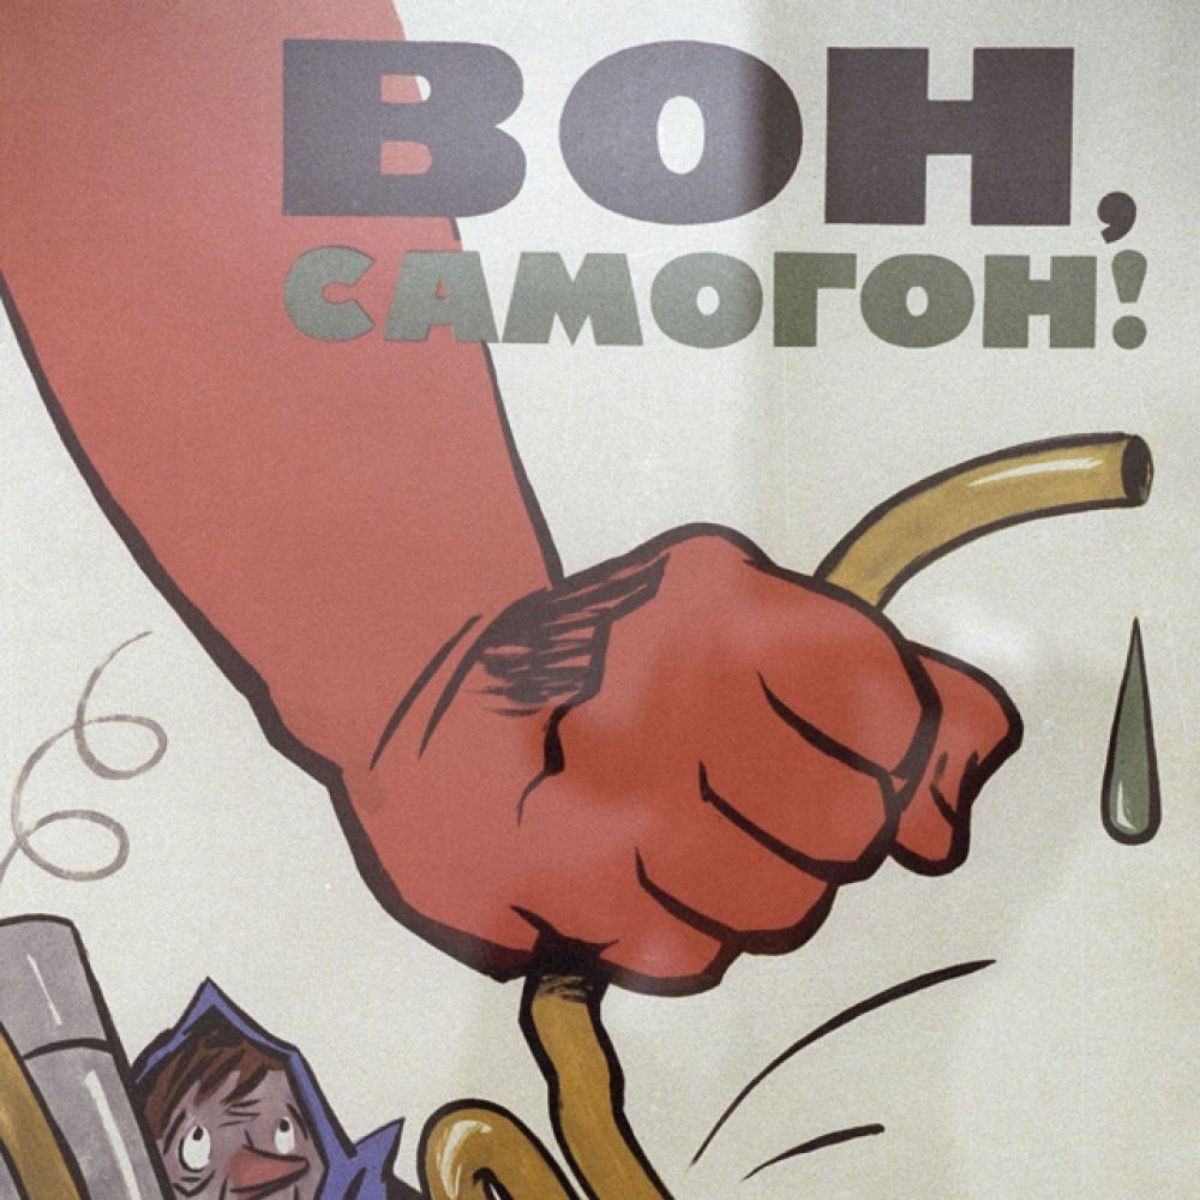 USSR poster against alcohol